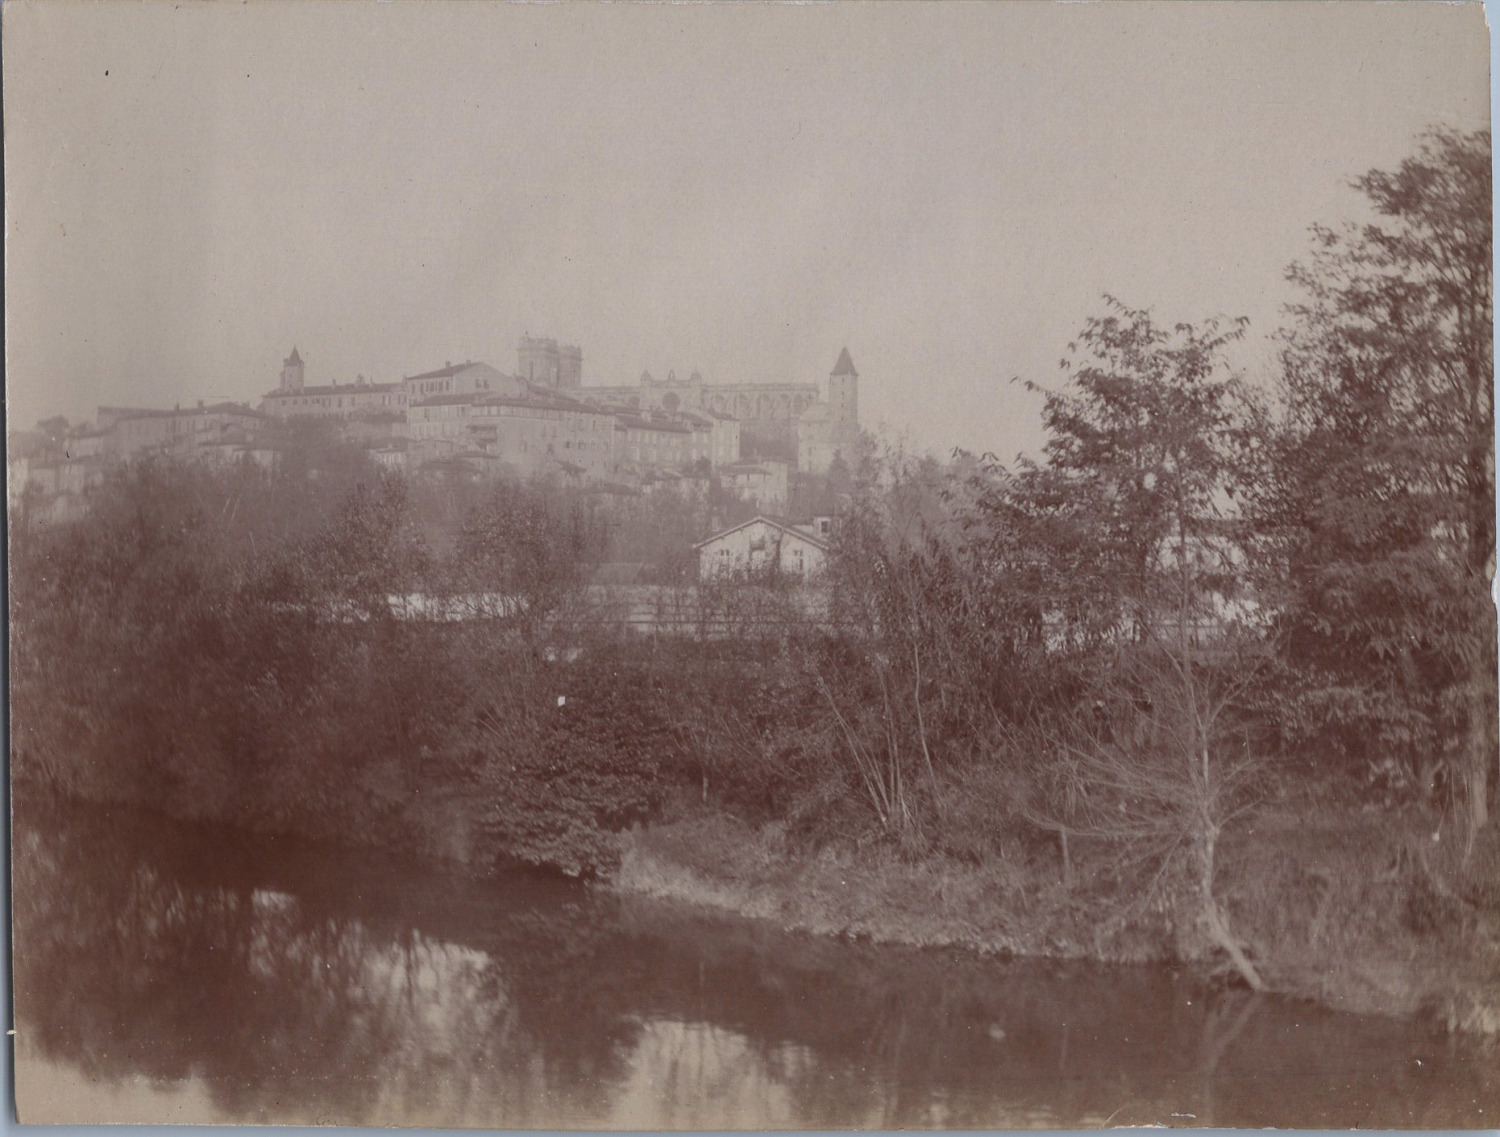 France, Auch, General View and Cathedral of Sainte-Marie, vintage albumin print, c